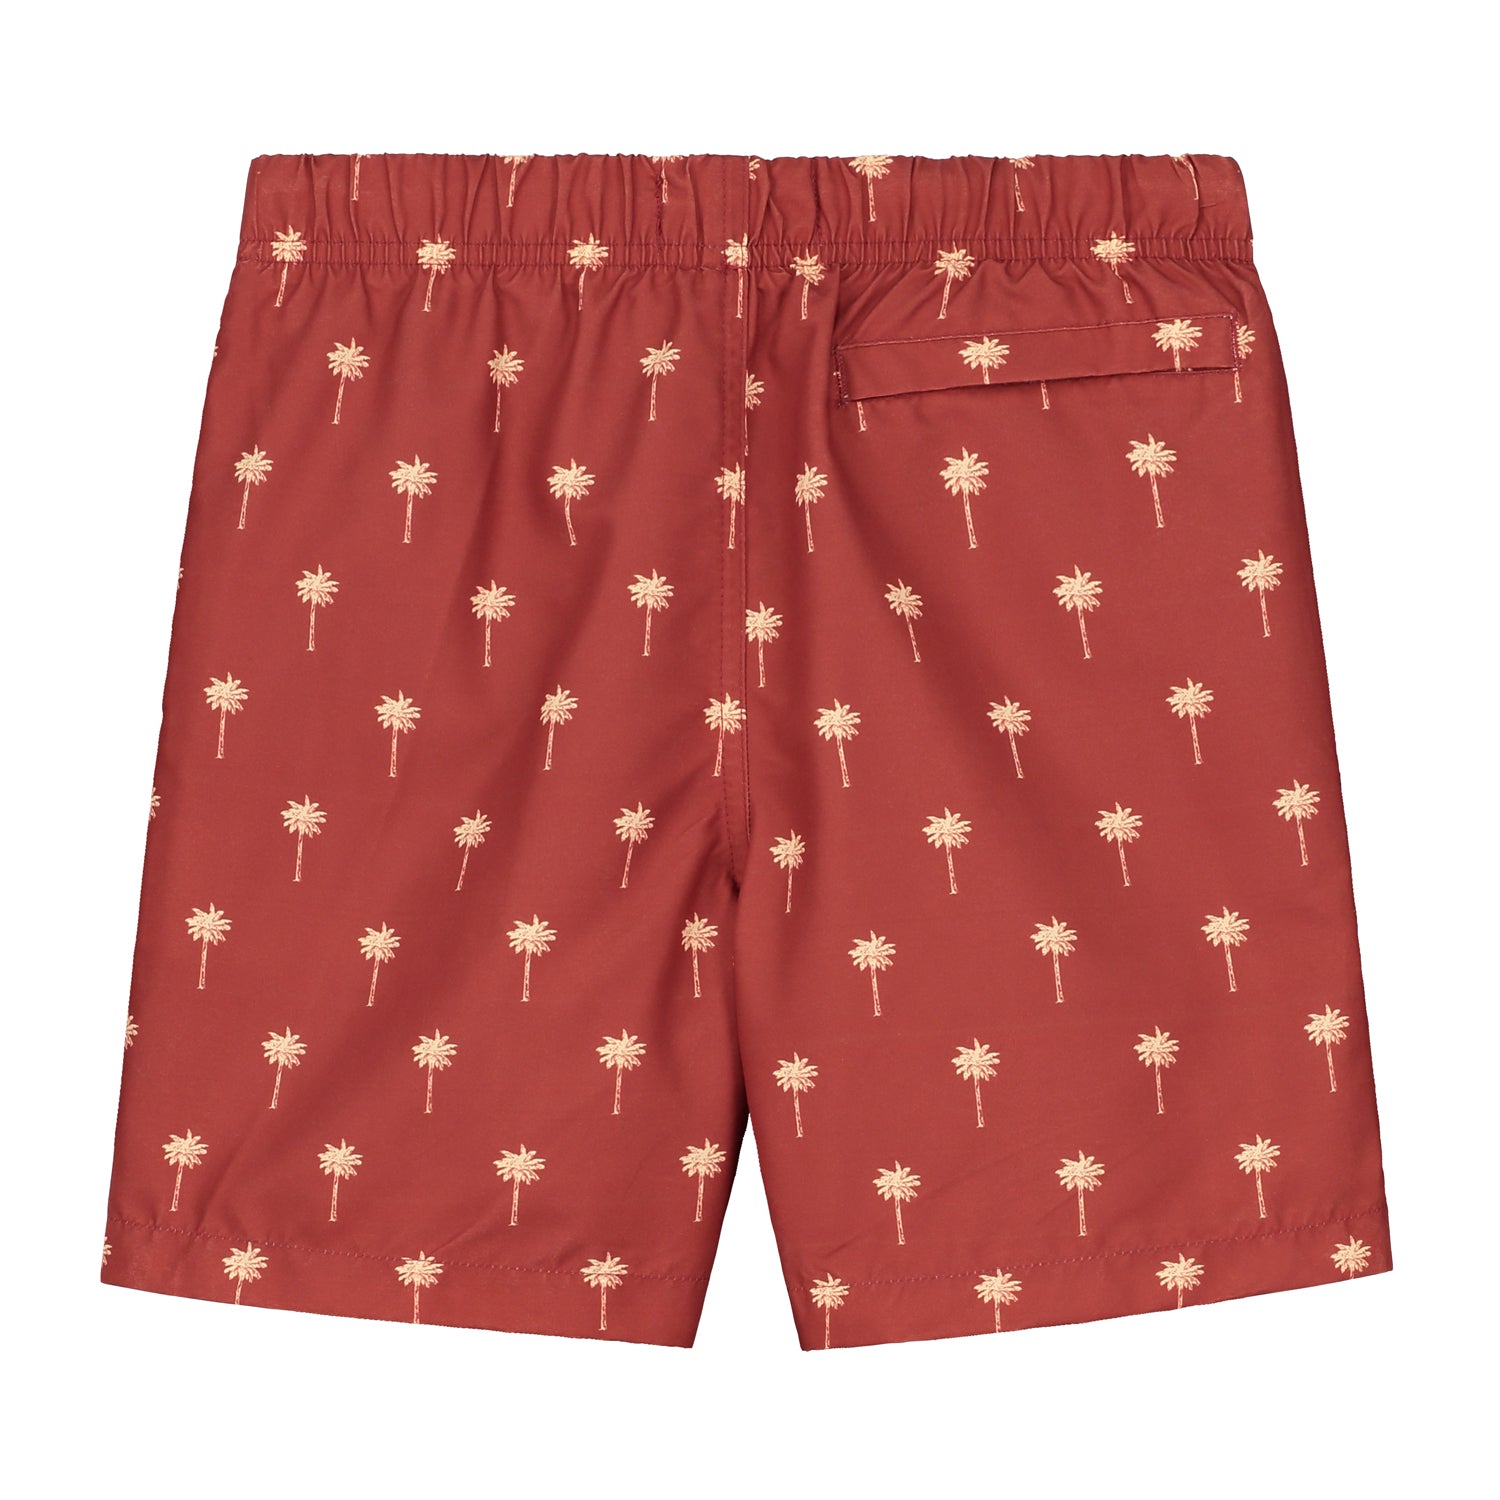 boys swimshort scratched shiwi palm